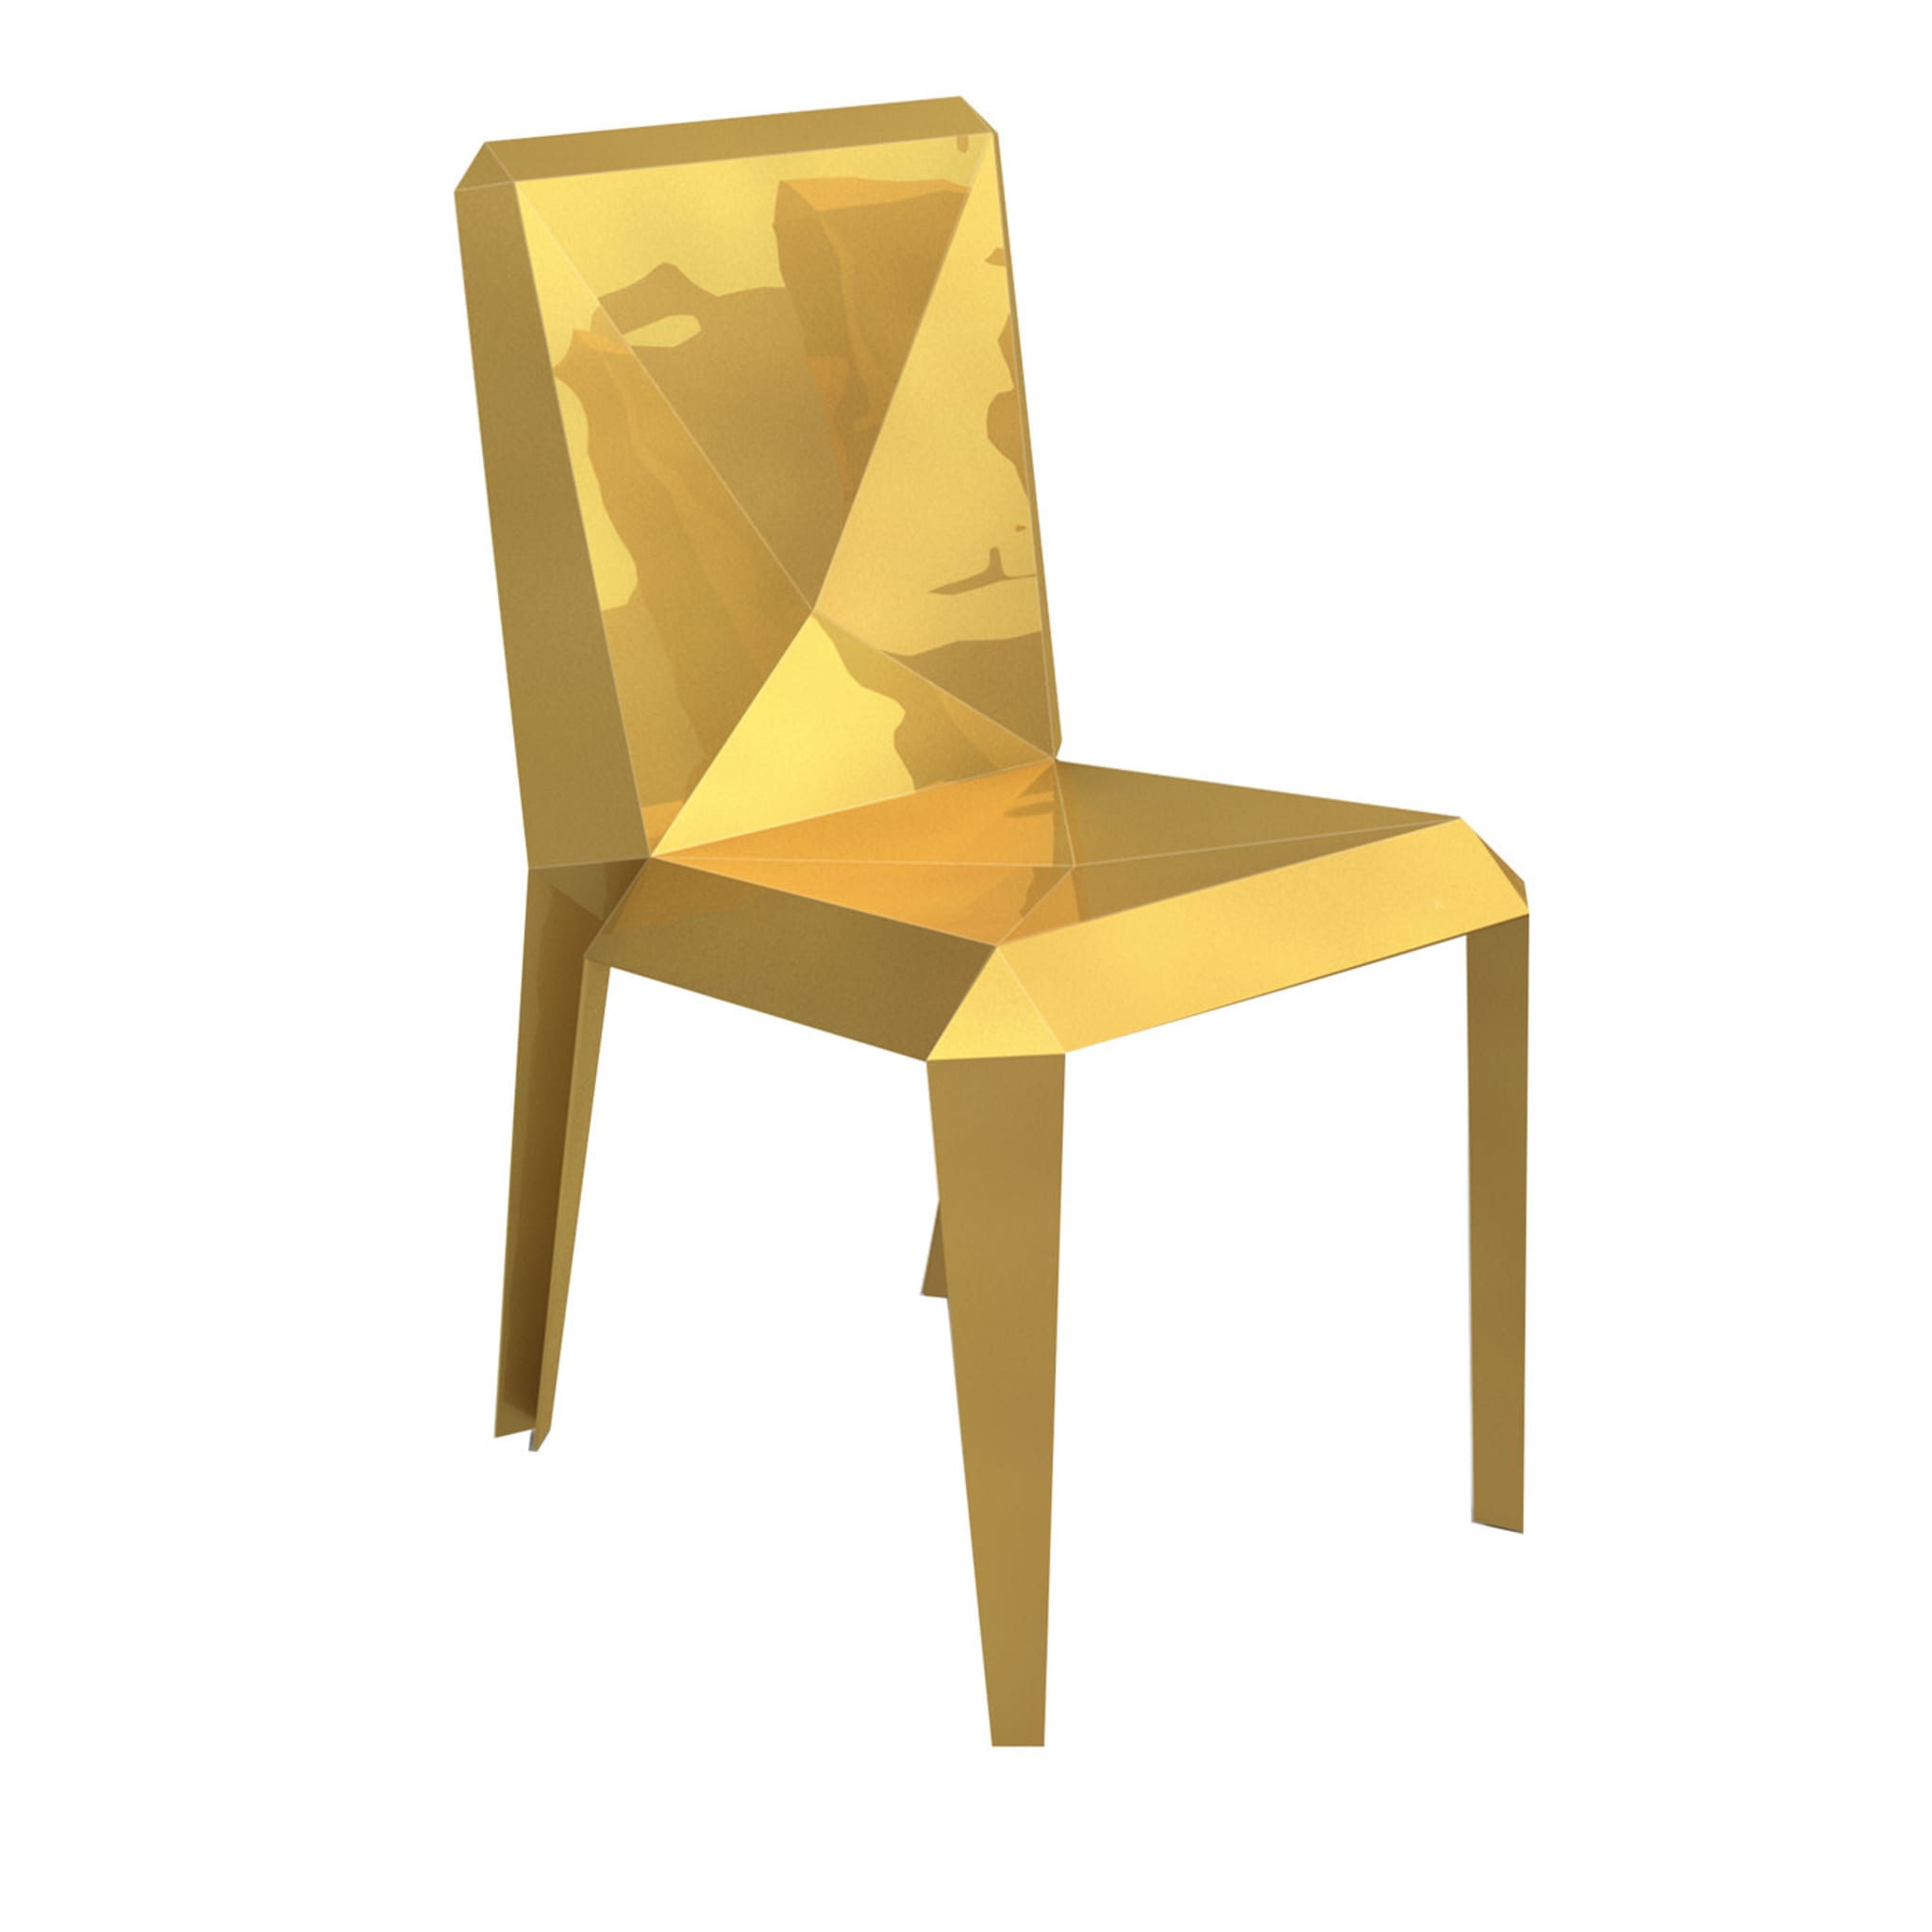 Lingotto Gold Chair by Garilab by Piter Perbellini - Main view